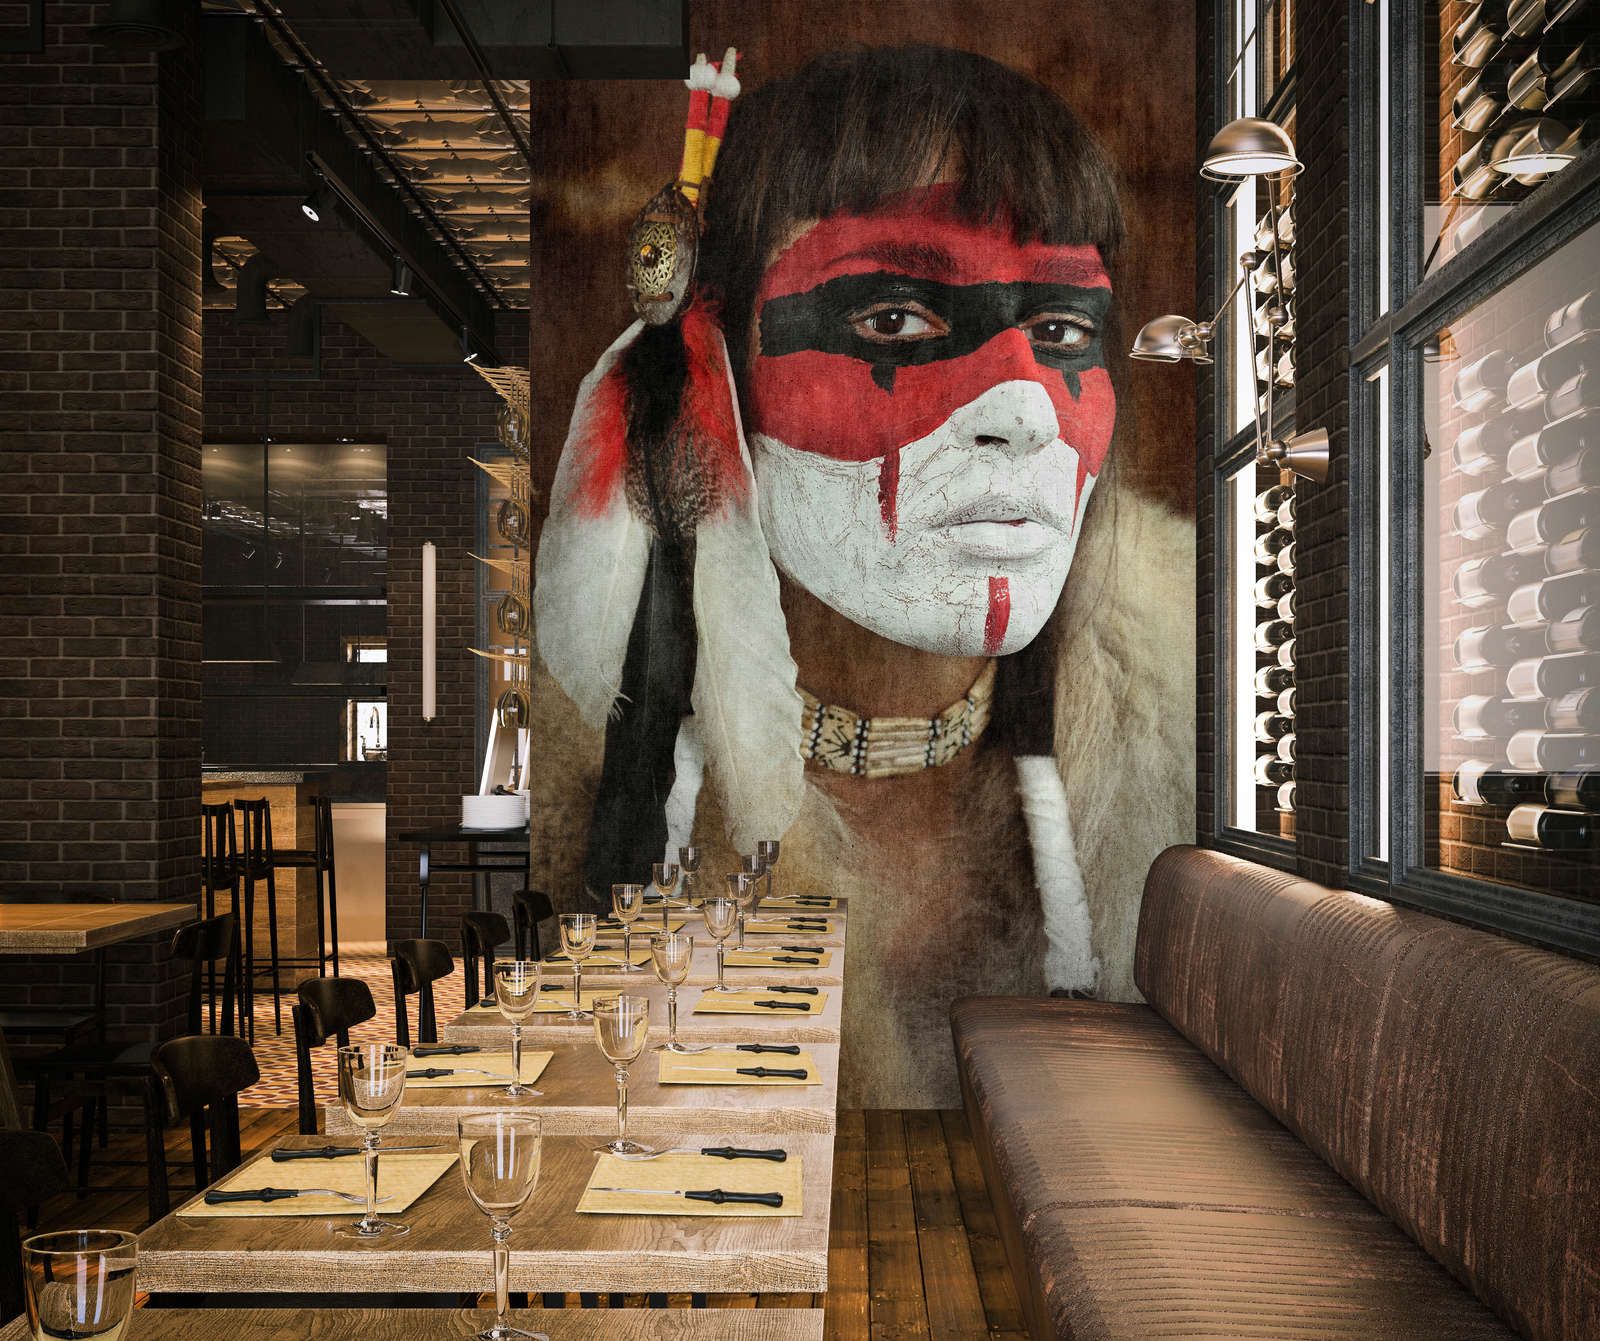             Photo wallpaper »ayasha« - Portrait of a warrior - motif with tapestry structure | Lightly textured non-woven fabric
        